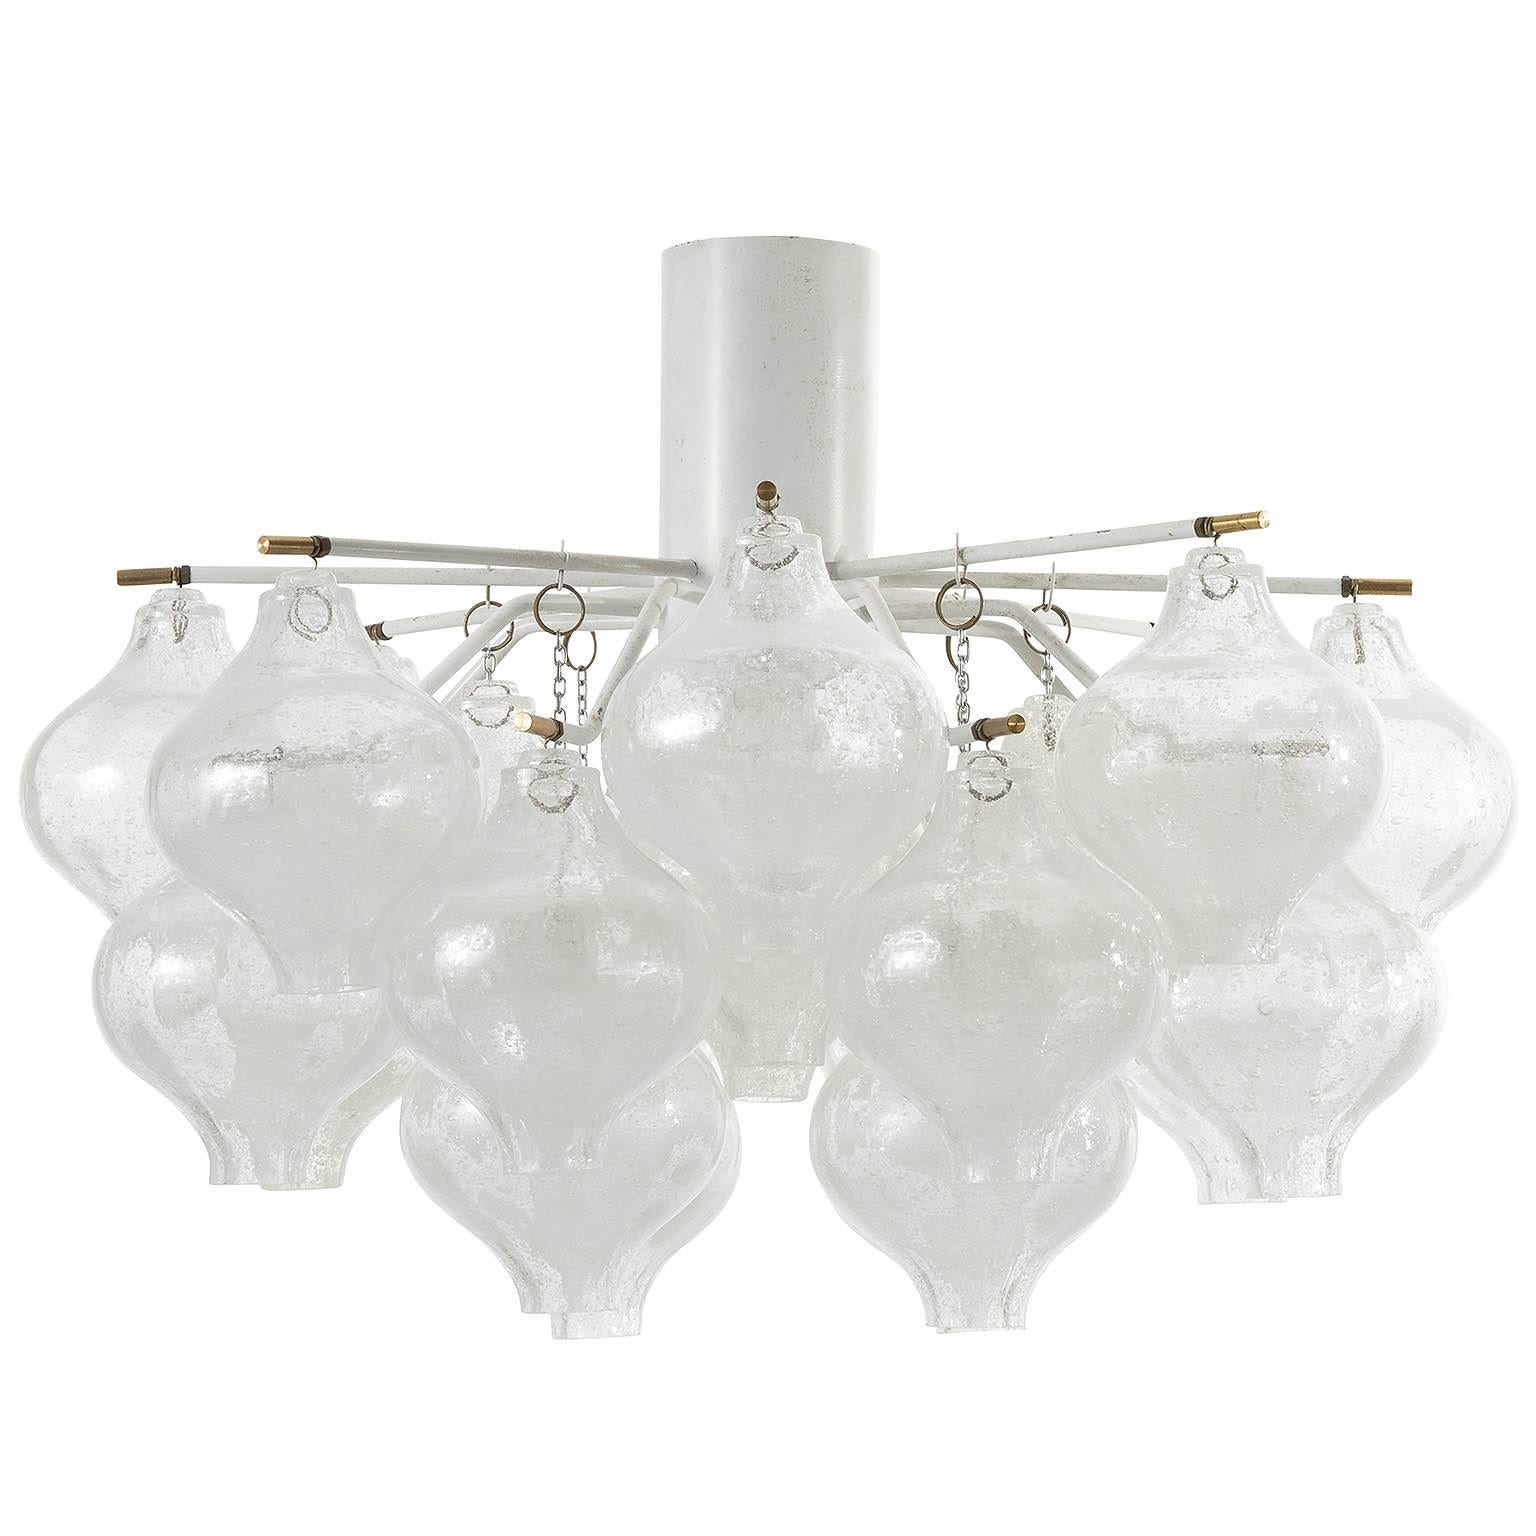 Two beautiful 'Tulipan' flushmount lights or chandeliers by Kalmar Austria, manufactured in MidCentury, circa 1970 (late 1960s or early 1970s).
The name Tulipan derives from the tulip shaped hand blown bubble glasses. Each glass is handmade and